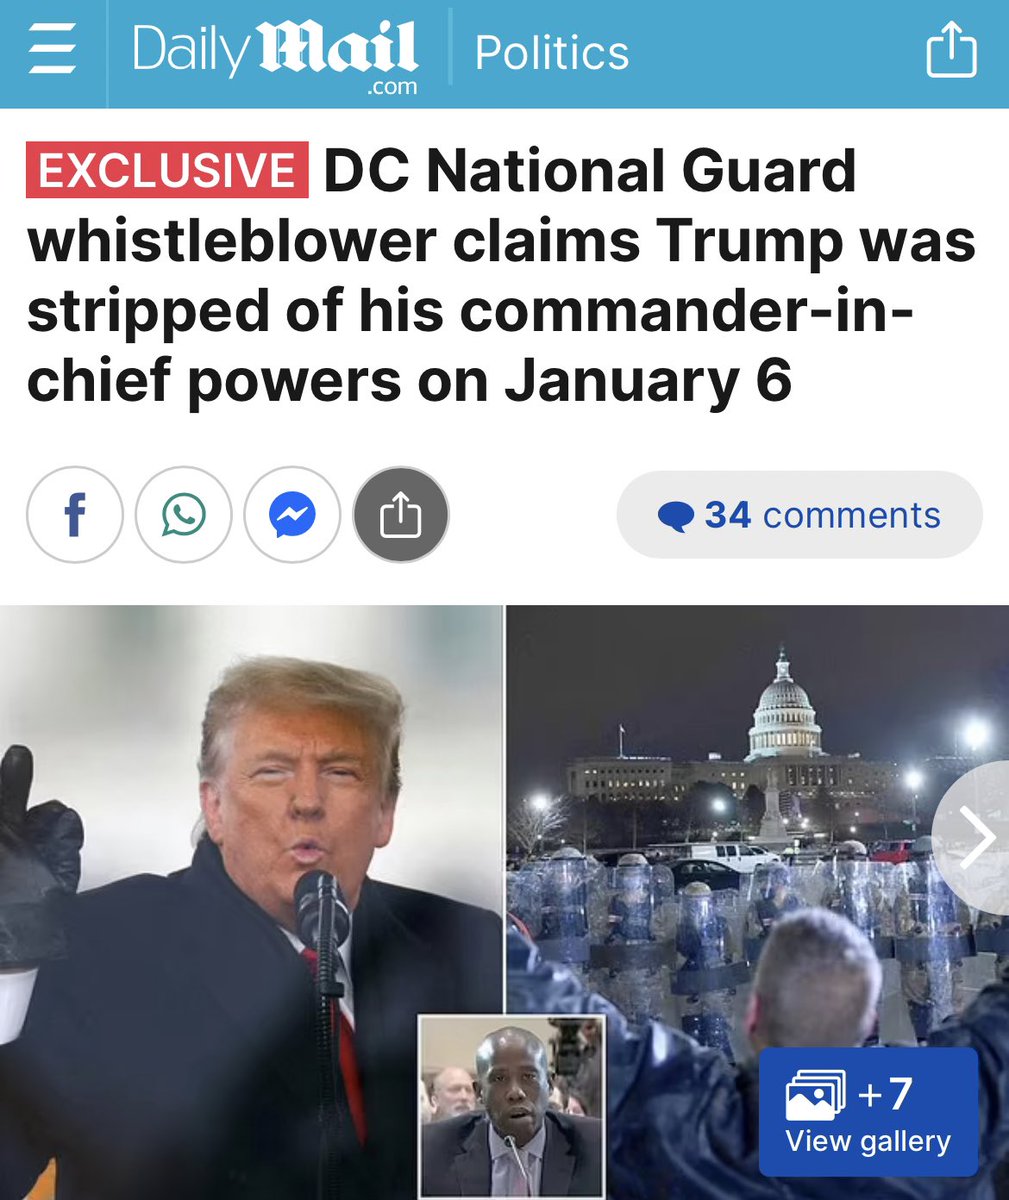 DC National Guard whistleblower claims Trump was stripped of his commander-in-chief powers on January 6 Read: dailymail.co.uk/news/article-1…